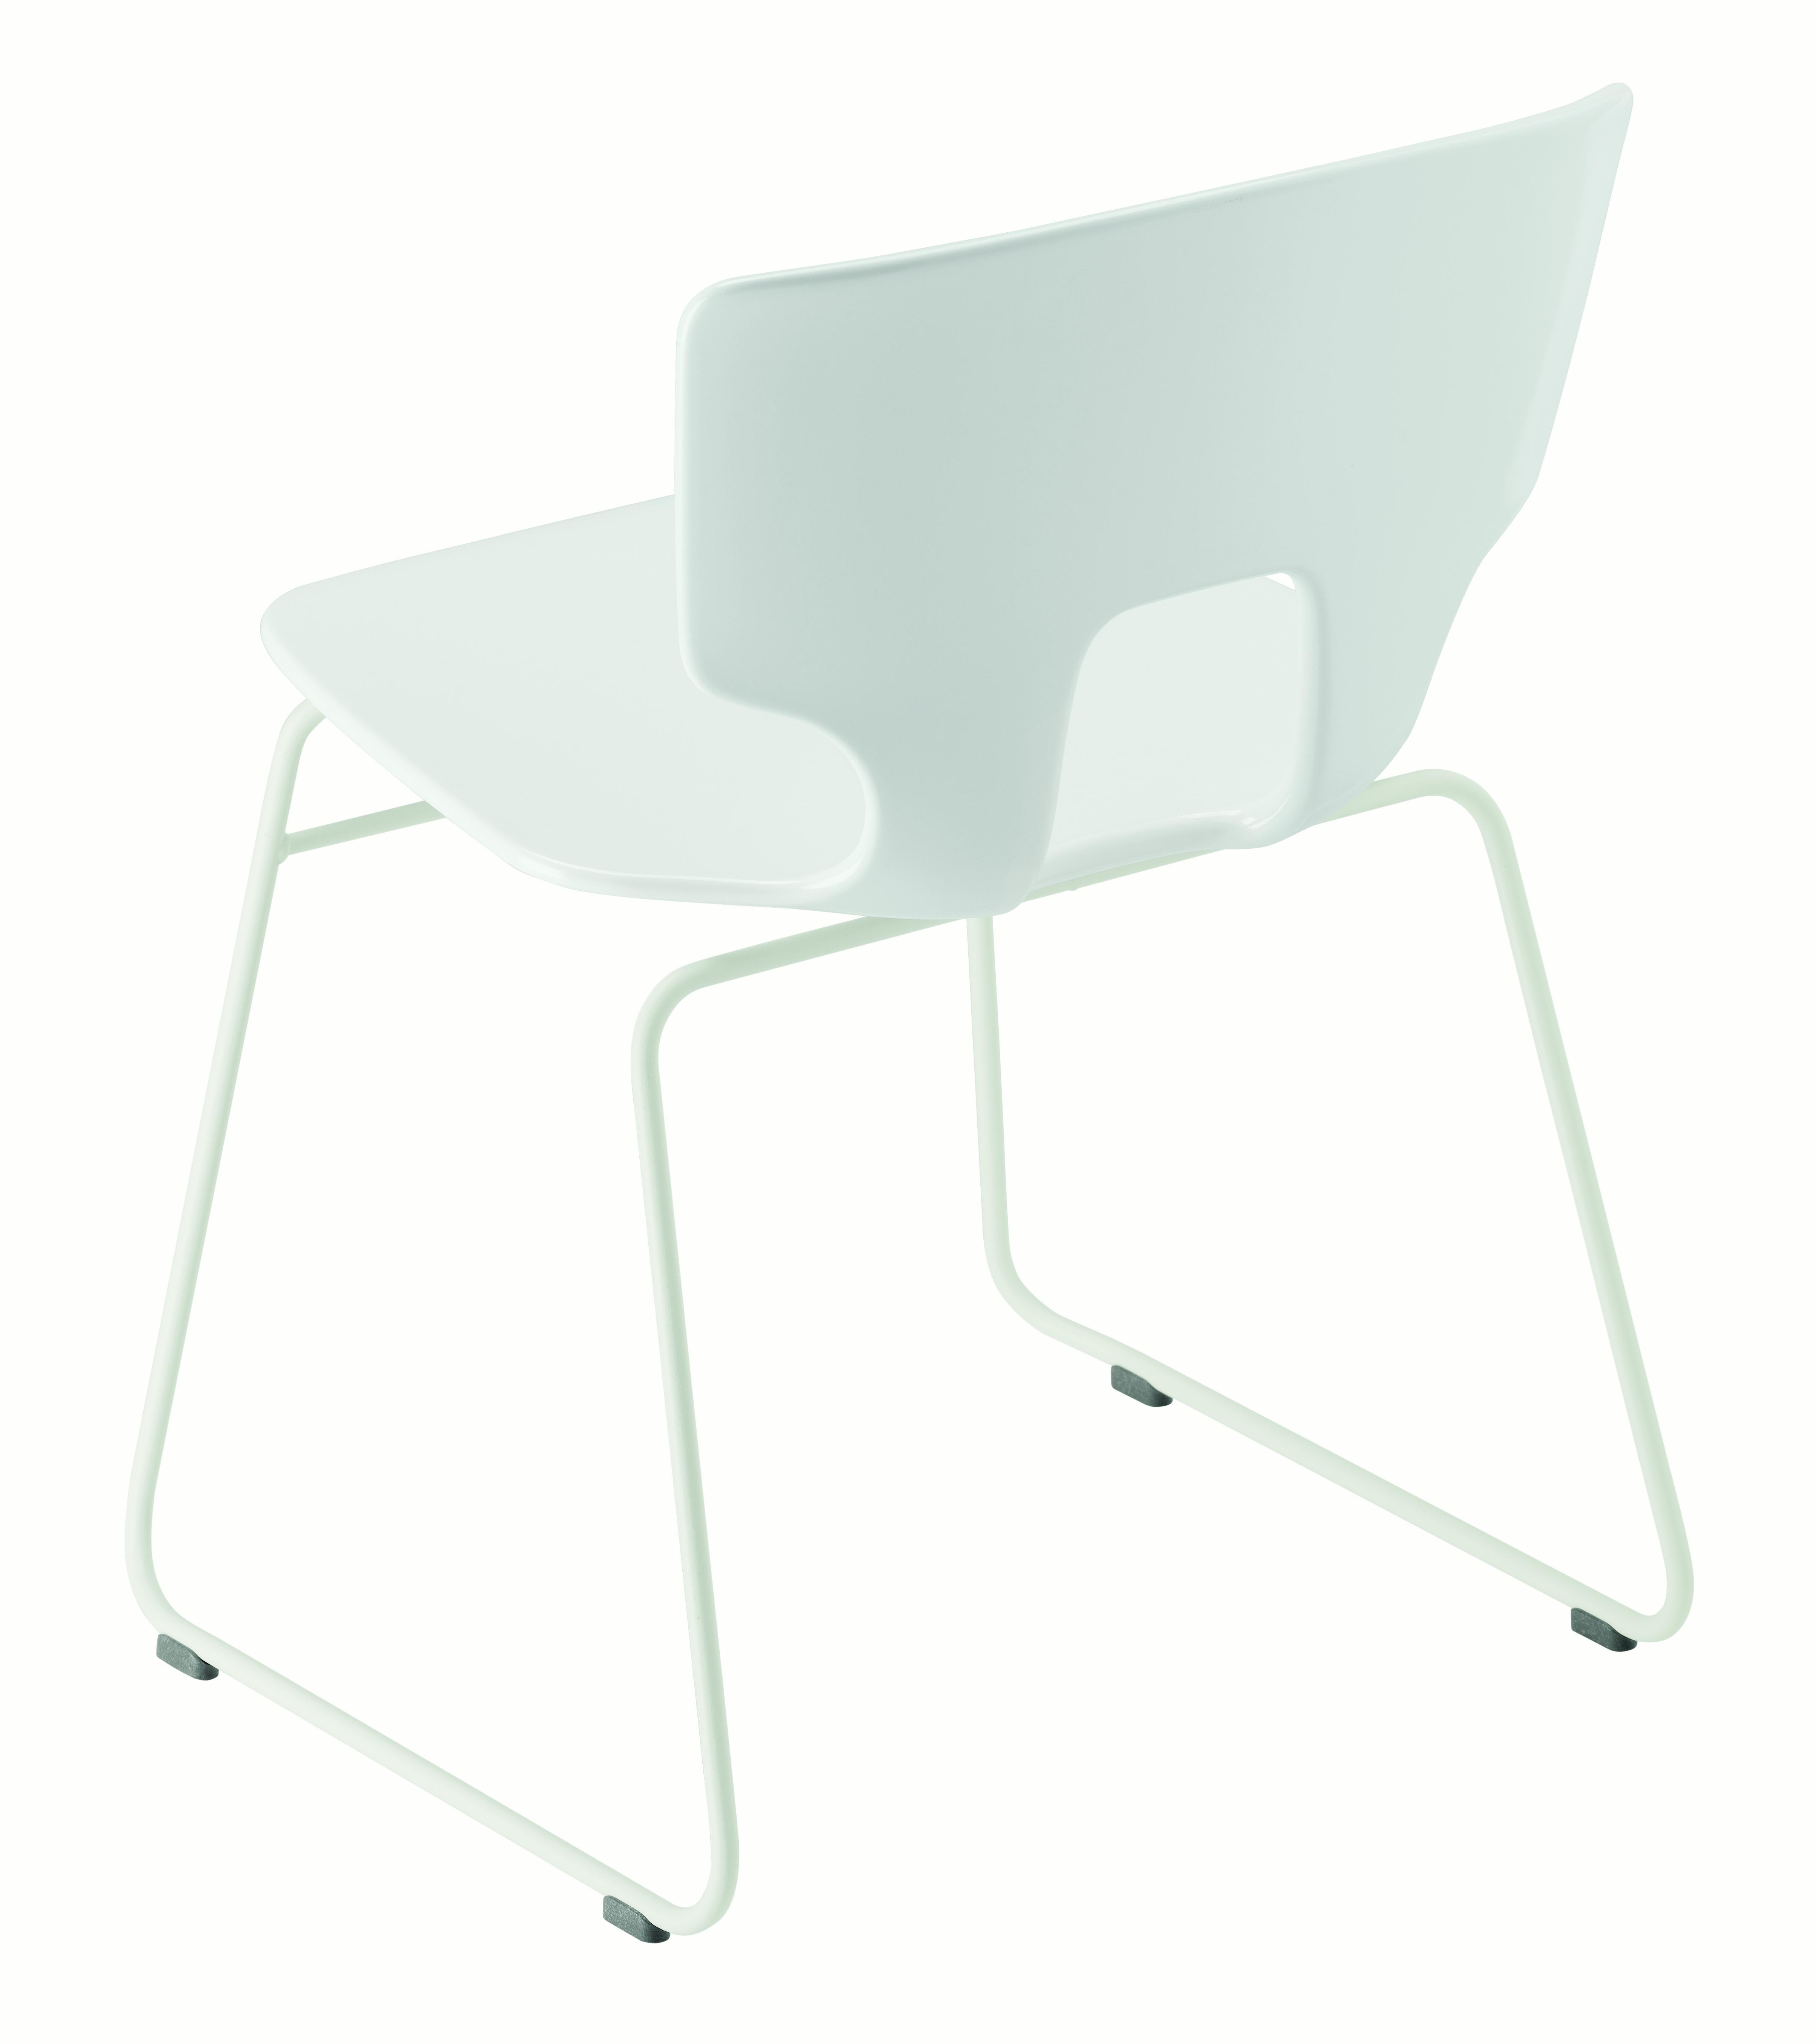 Alias 50B Erice Sledge Chair in White Lacquered Steel Frame by Alfredo Häberli

Stacking chair with structure in lacquered or chromed steel; seat and back in solid plastic material.

Born in Lenno Tremezzina (Como), in 1945, he graduated in